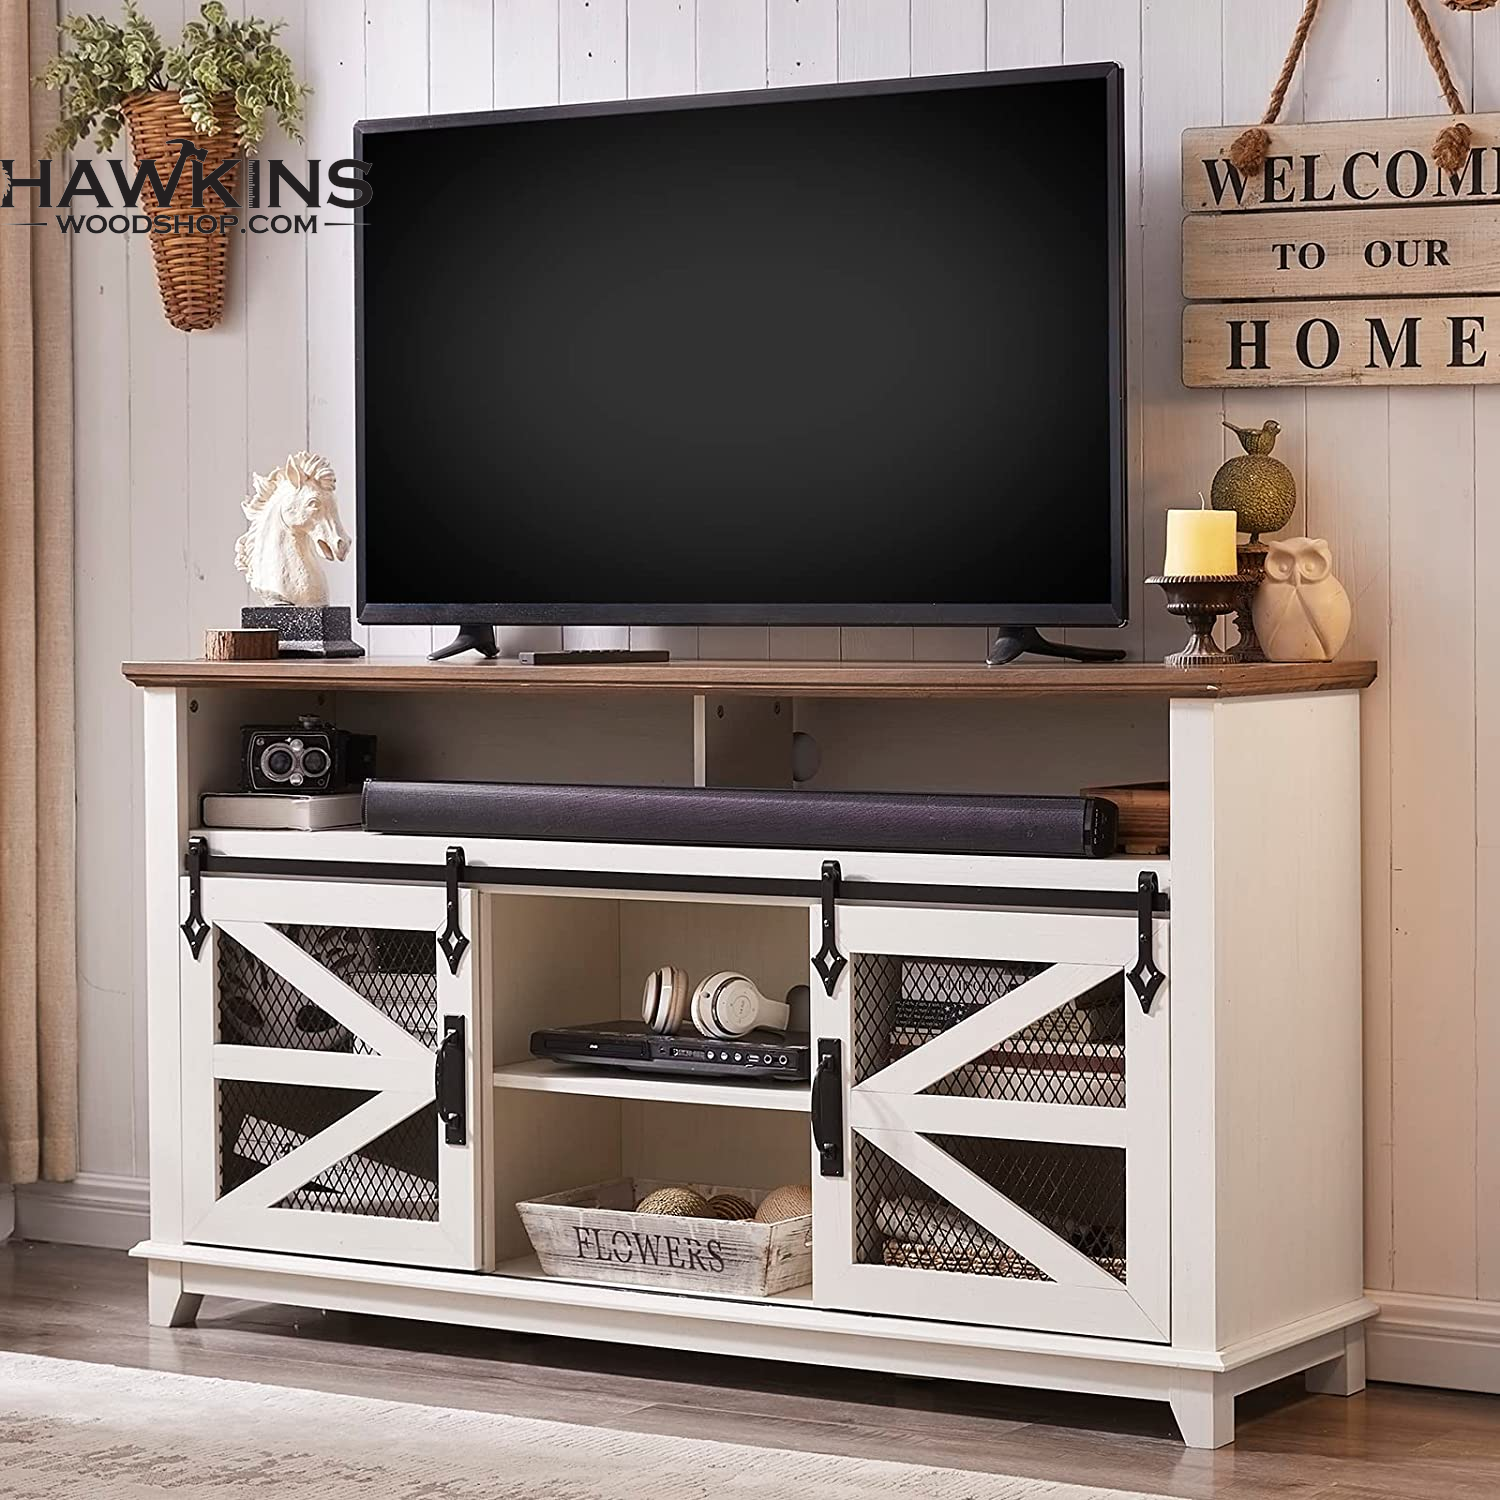 Sliding Barn Door Tv Stand, Industrial, Modern Media Entertainment Center W/Sliding  Barn Door, Rustic Tv Console Cabinet, Adjustable Shelves, Antique White –  Built To Order, Made In Usa, Custom Furniture – Free Within Barn Door Media Tv Stands (Photo 8 of 15)